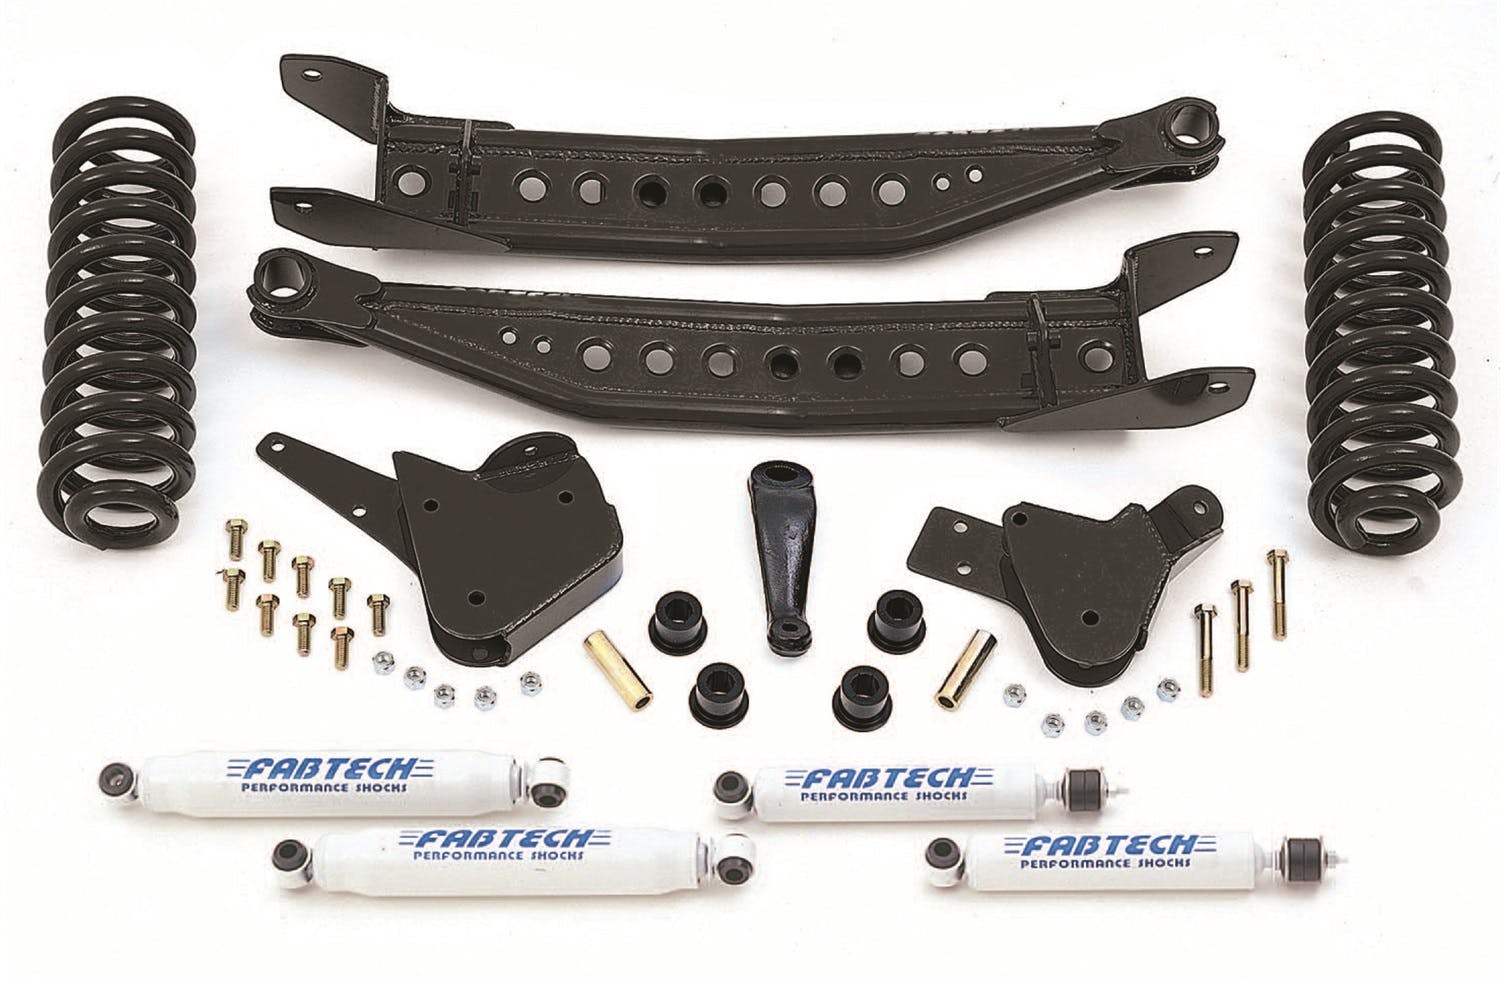 Fabtech K2104 6in. PERF SYS W/PERF SHKS 01-04 FORD F250/350 2WD/00-05 EXCURSION 2WD W/7.3L DIE